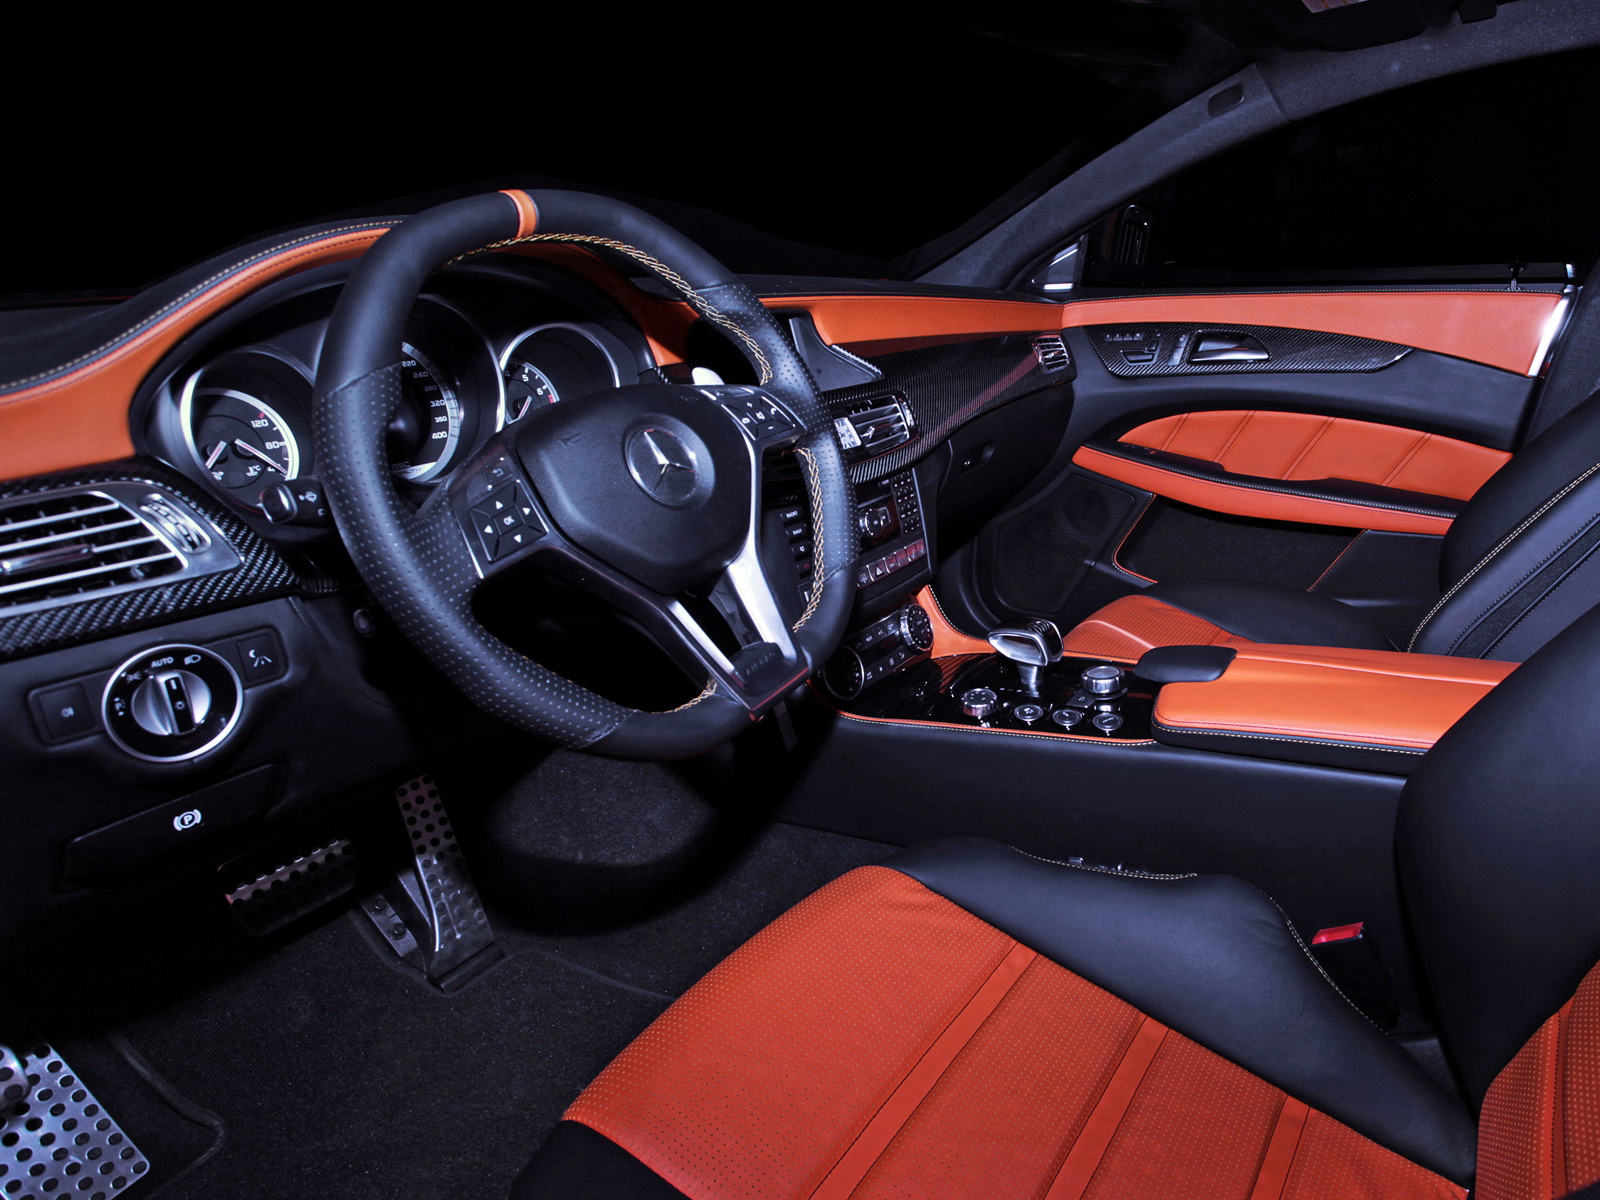 2013, Gsc, Mercedes, Benz, Cls63, Amg, Stealth, B s,  c218 , Tuning, Interior Wallpaper